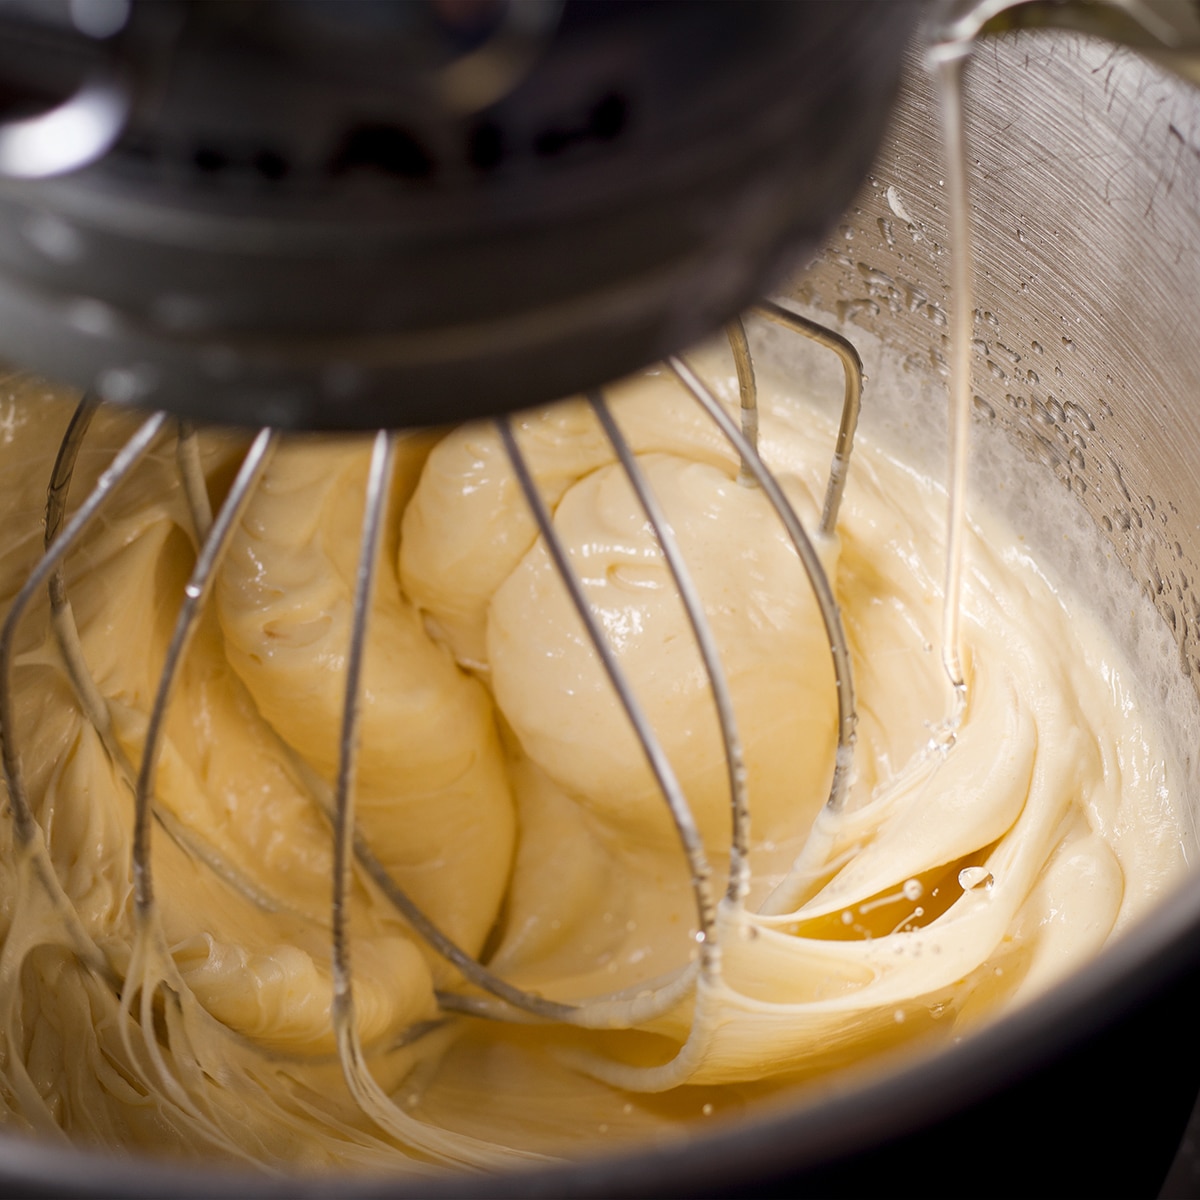 Pouring oil into the cake batter with the mixer running.